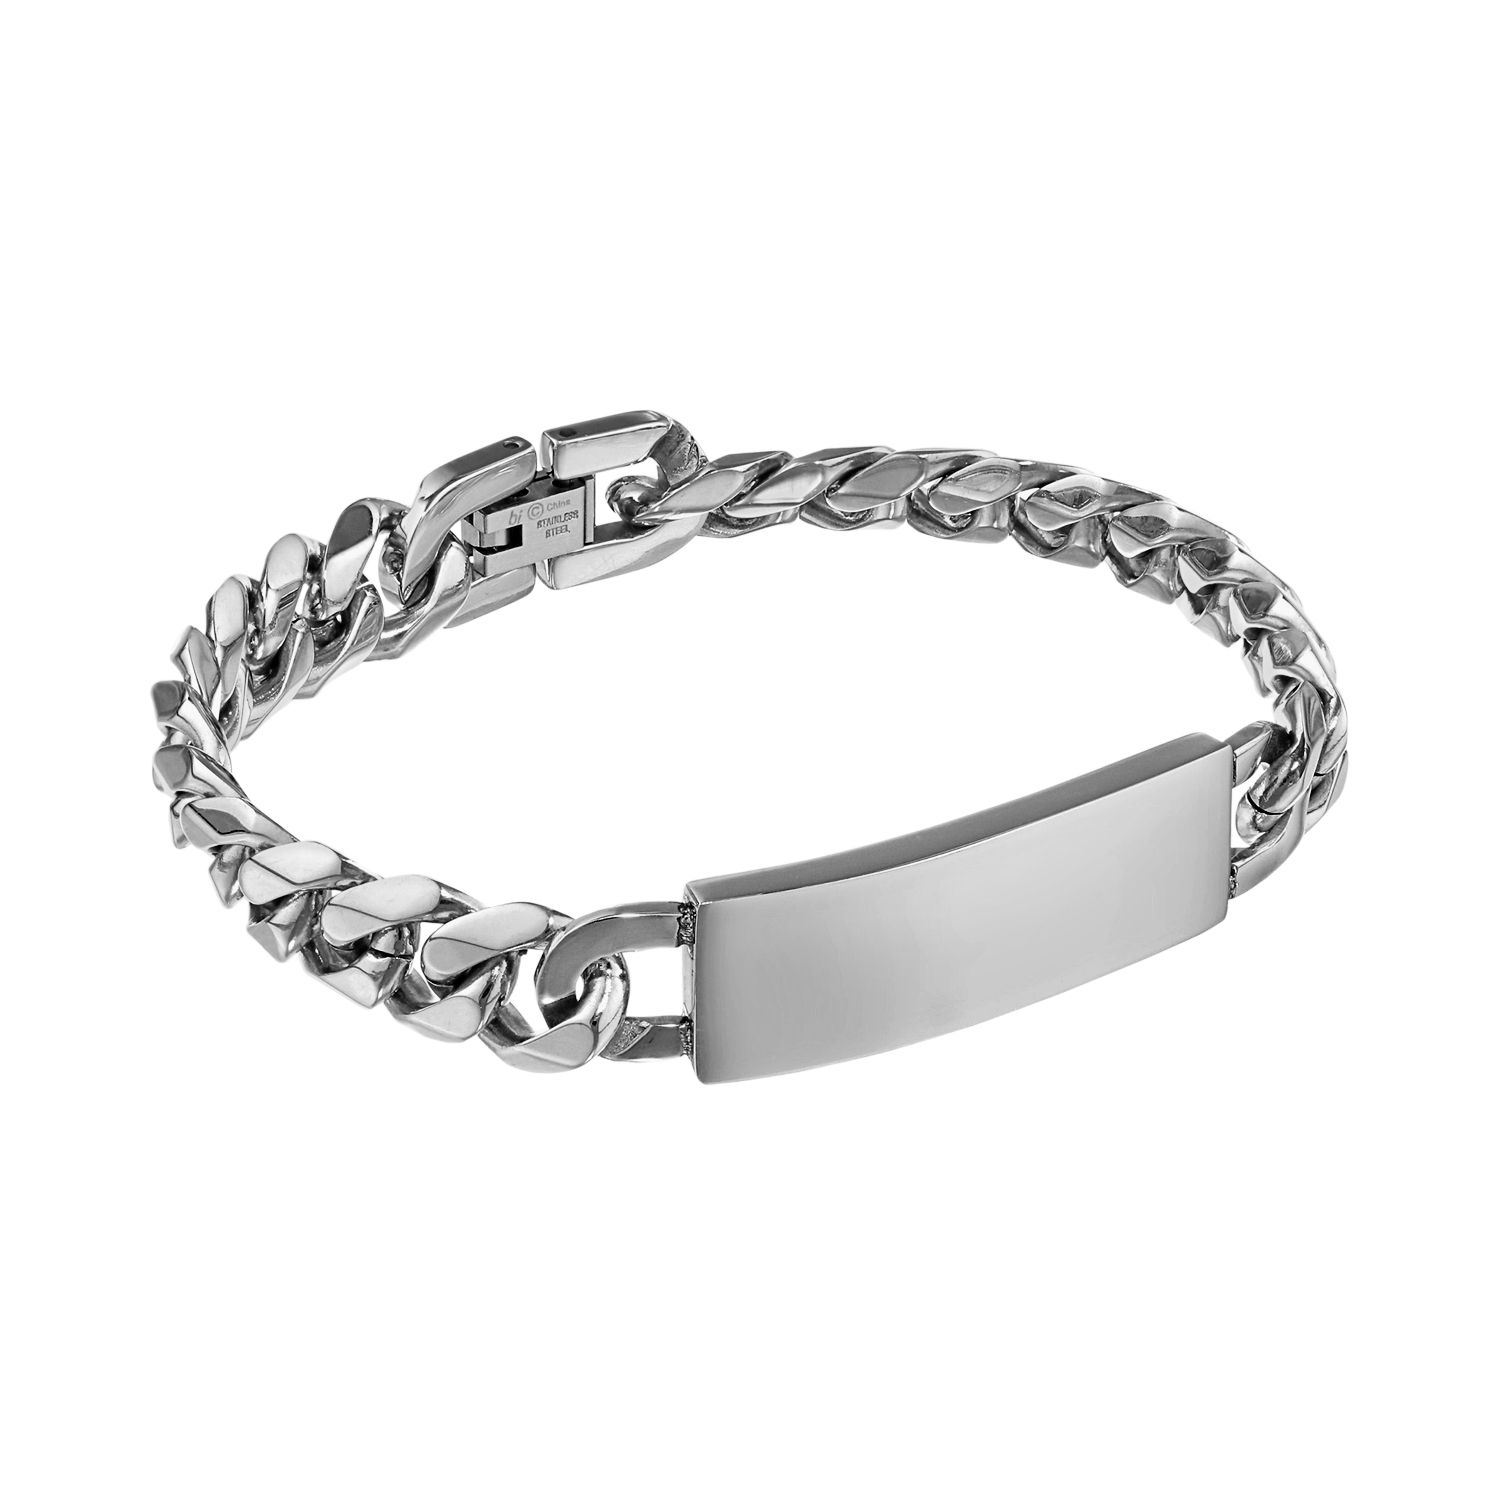 TT 7mm Gold-Tone Stainless Steel Curb Chain ID Bracelet BBR211 